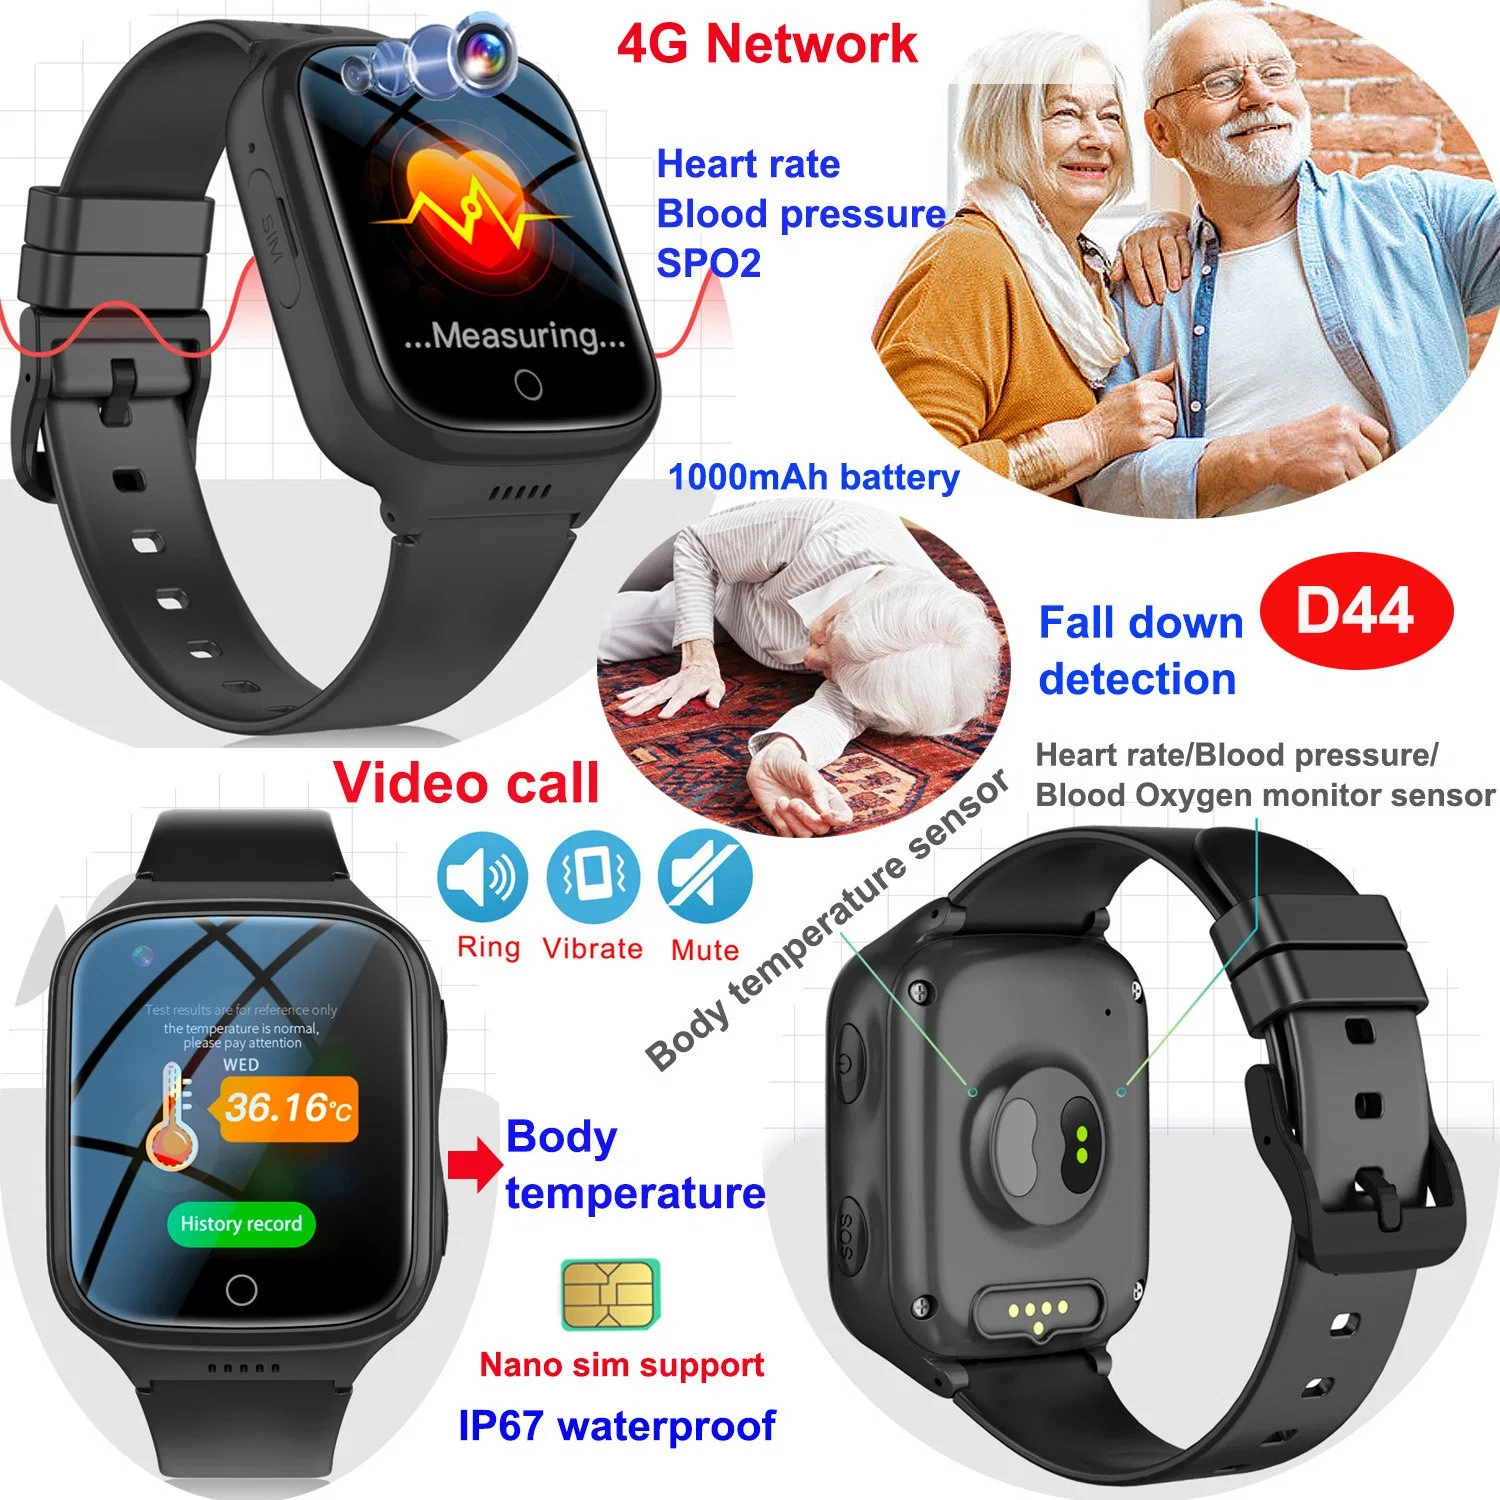 New arrival China manufacturer 4G Waterproof IP67 Senior Healthcare Smart Watch GPS tracker with video call fall down detection HR BP SPO2 D44